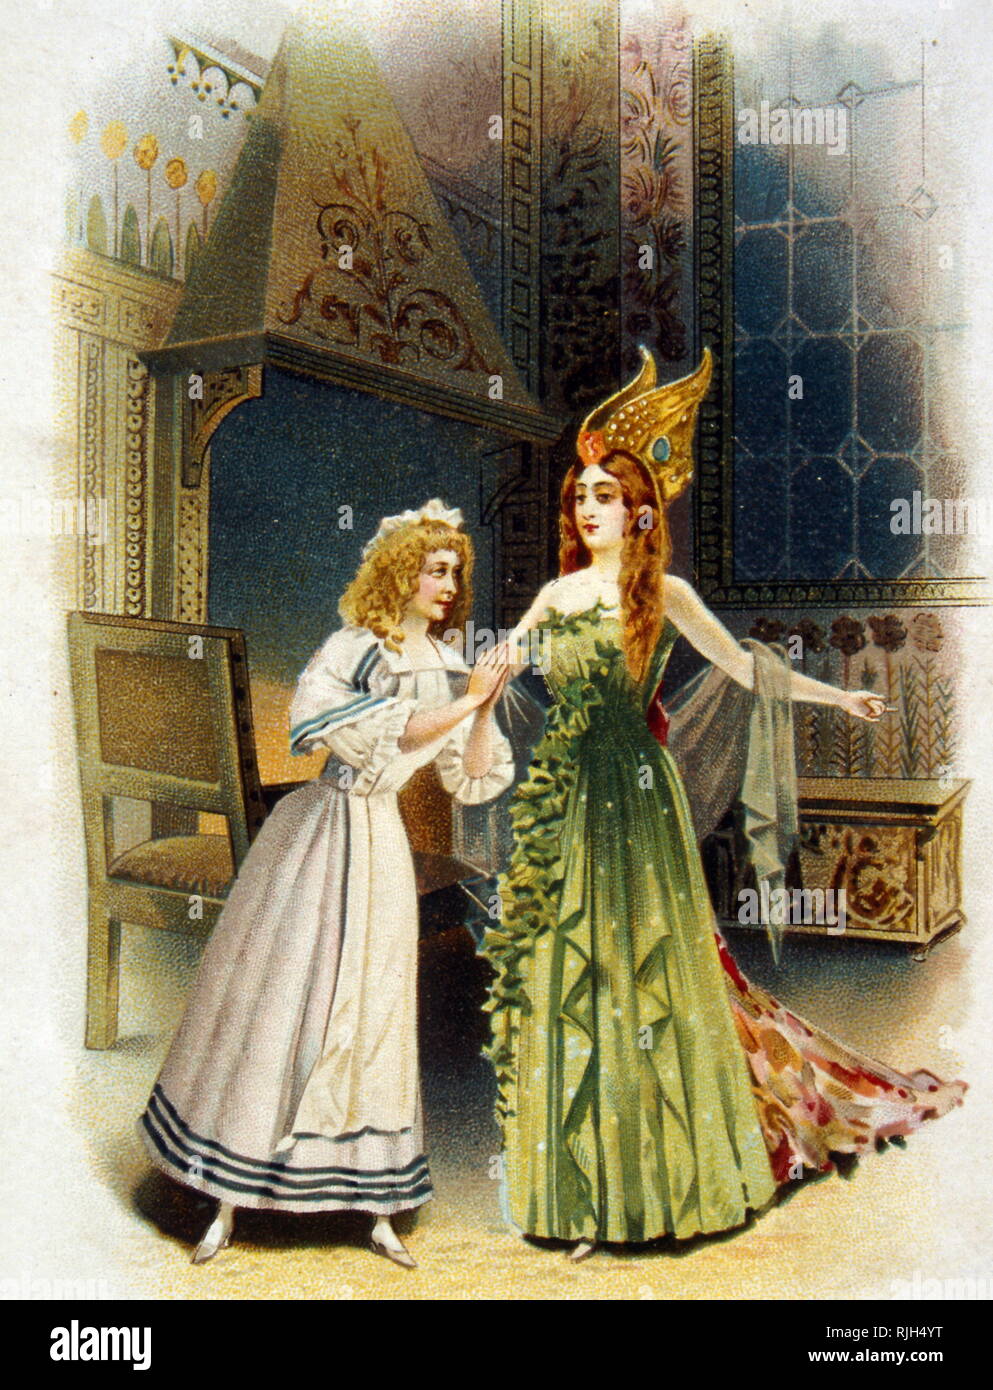 Chromolithograph of the story of Cendrillon (Cinderella). The good fairy godmother visits Cinderella. 1900 Stock Photo